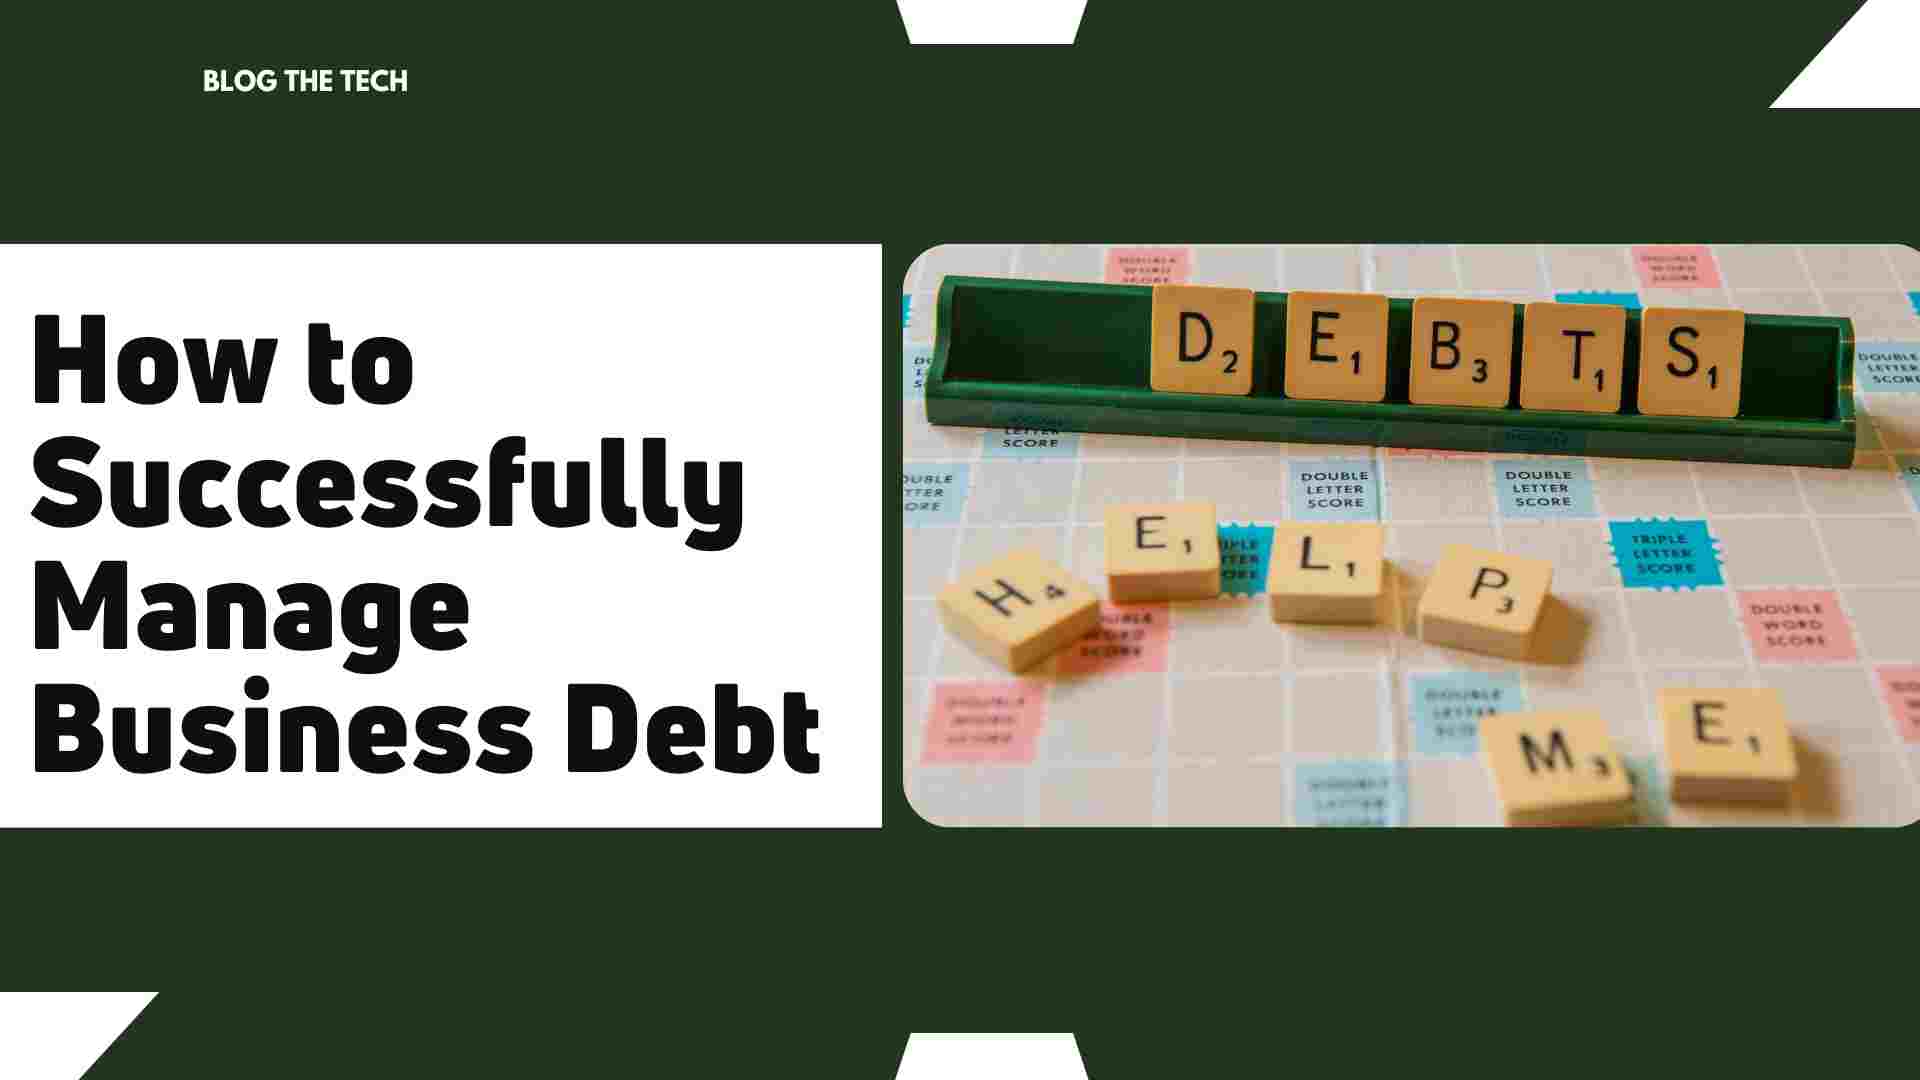 How to Successfully Manage Business Debt